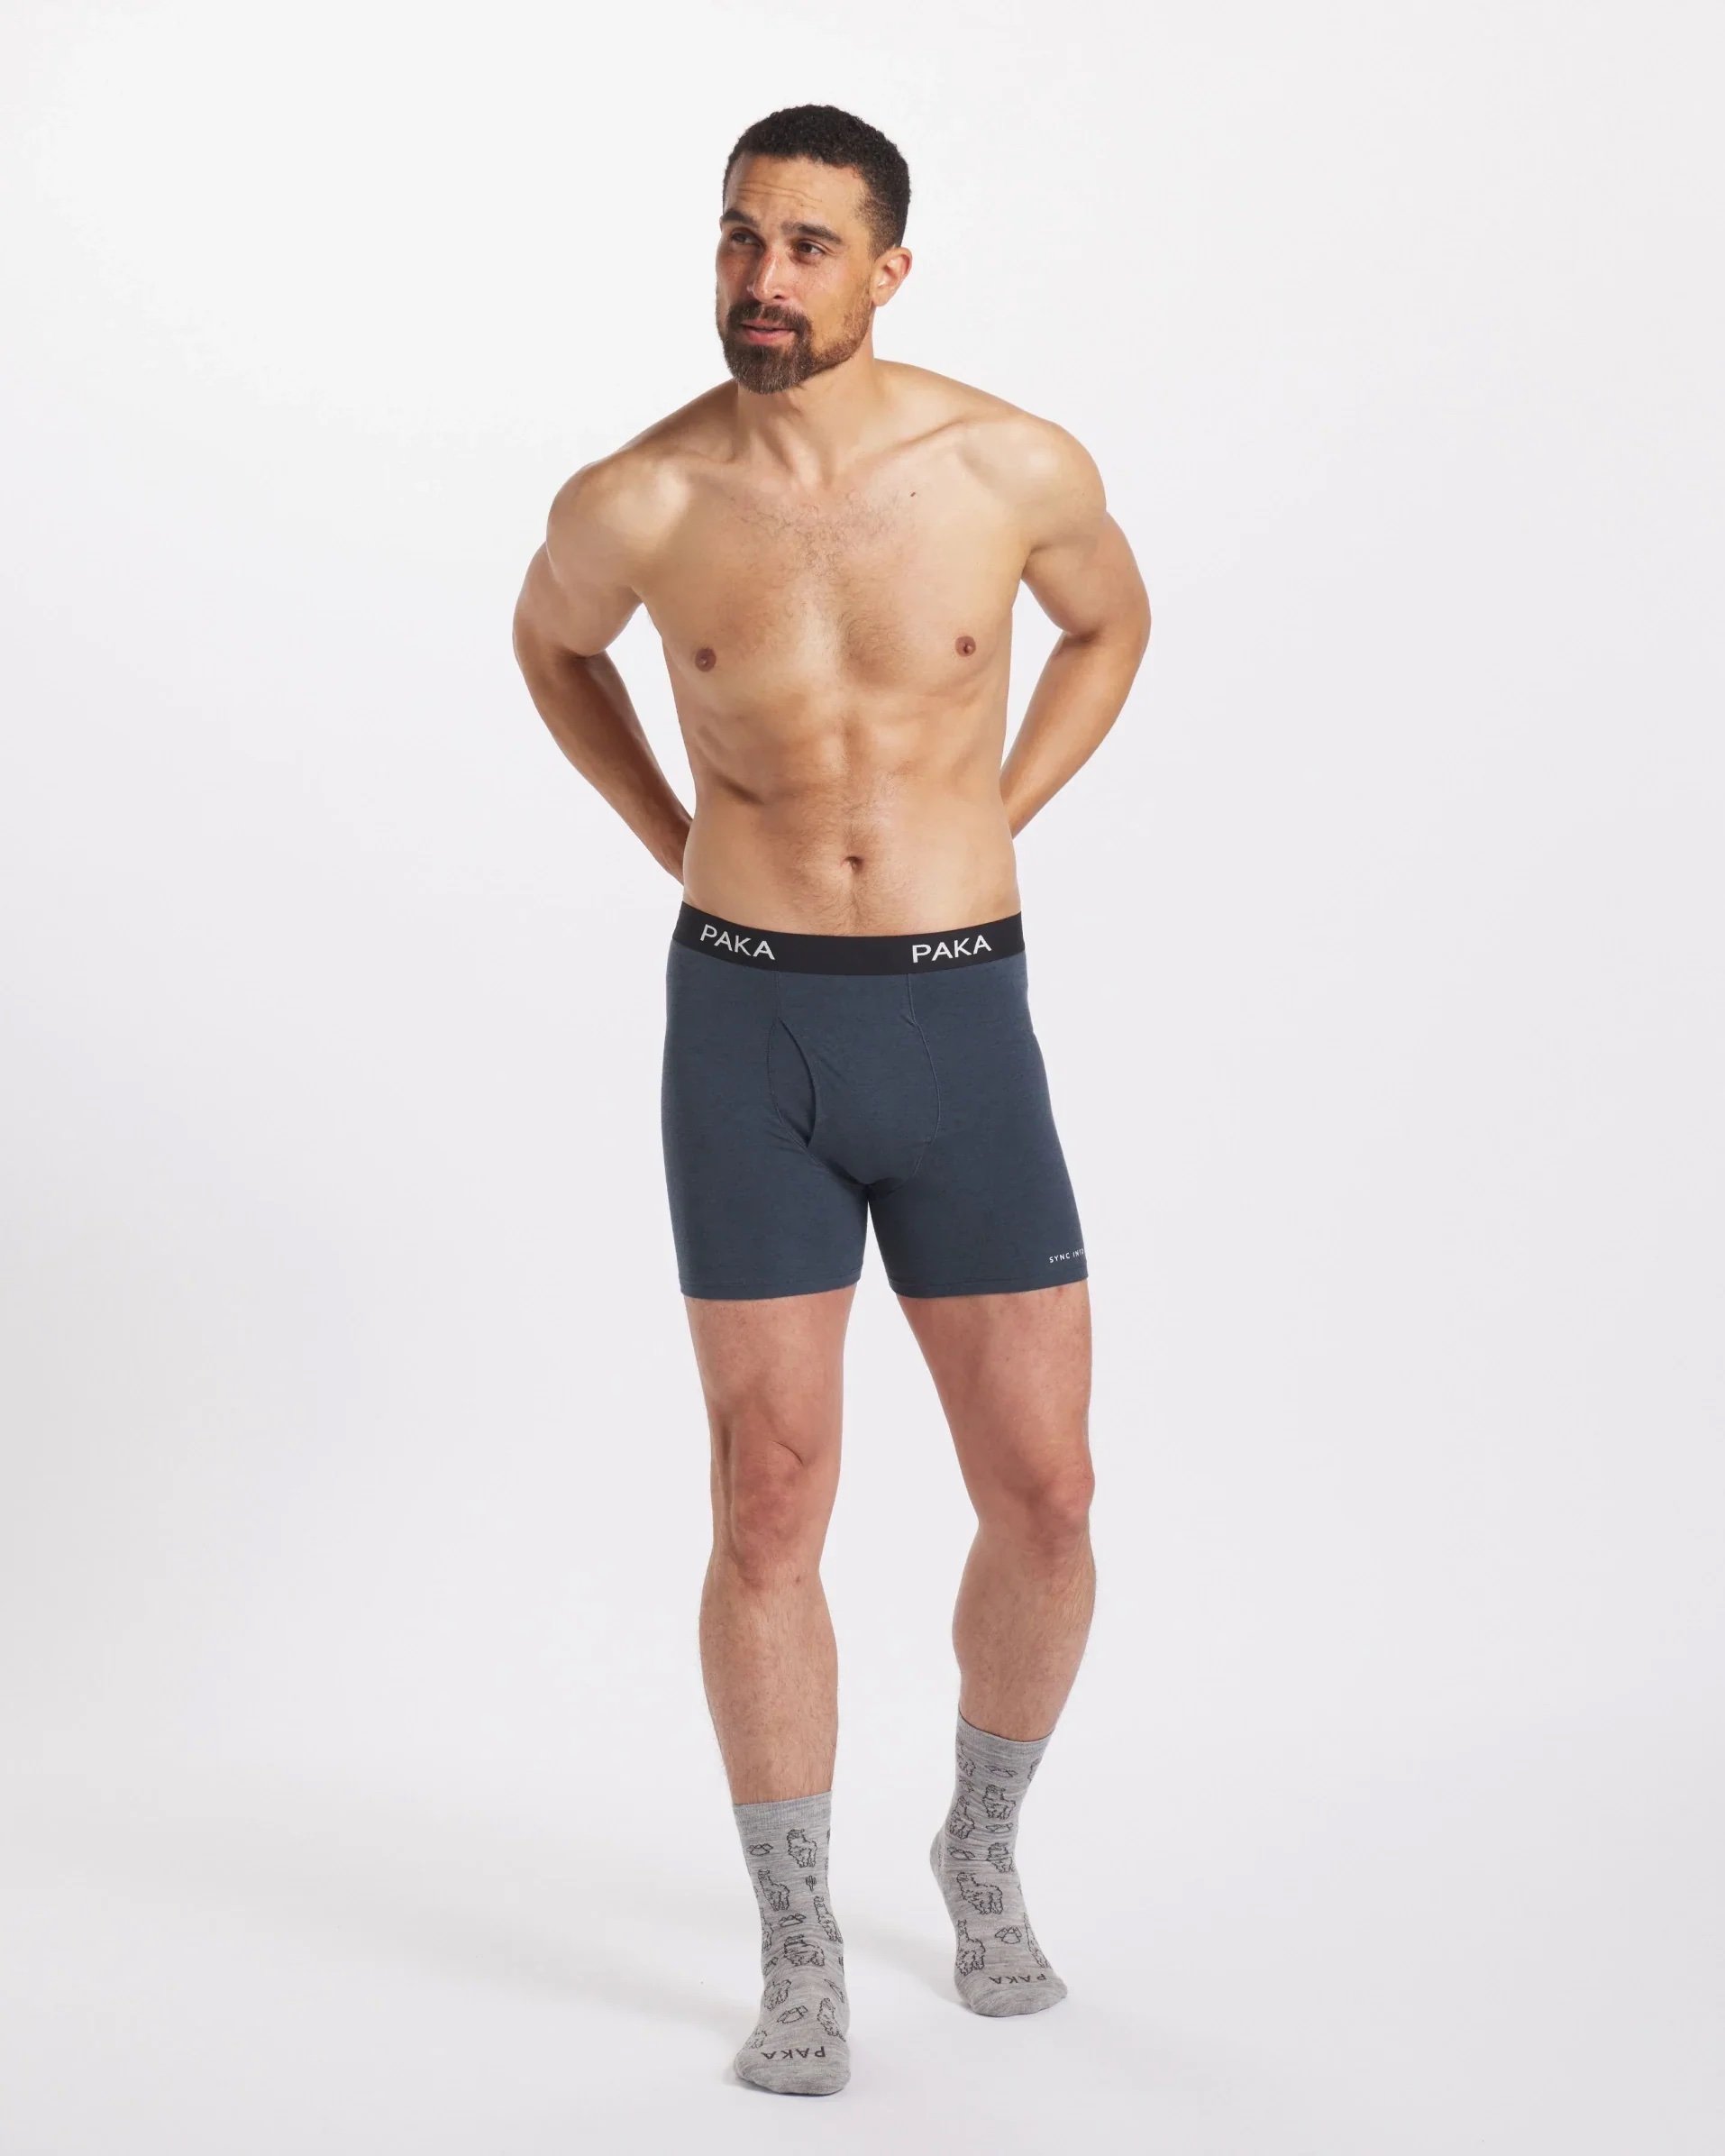 Embrace Comfort and Sustainability with WAMA Underwear's Men's